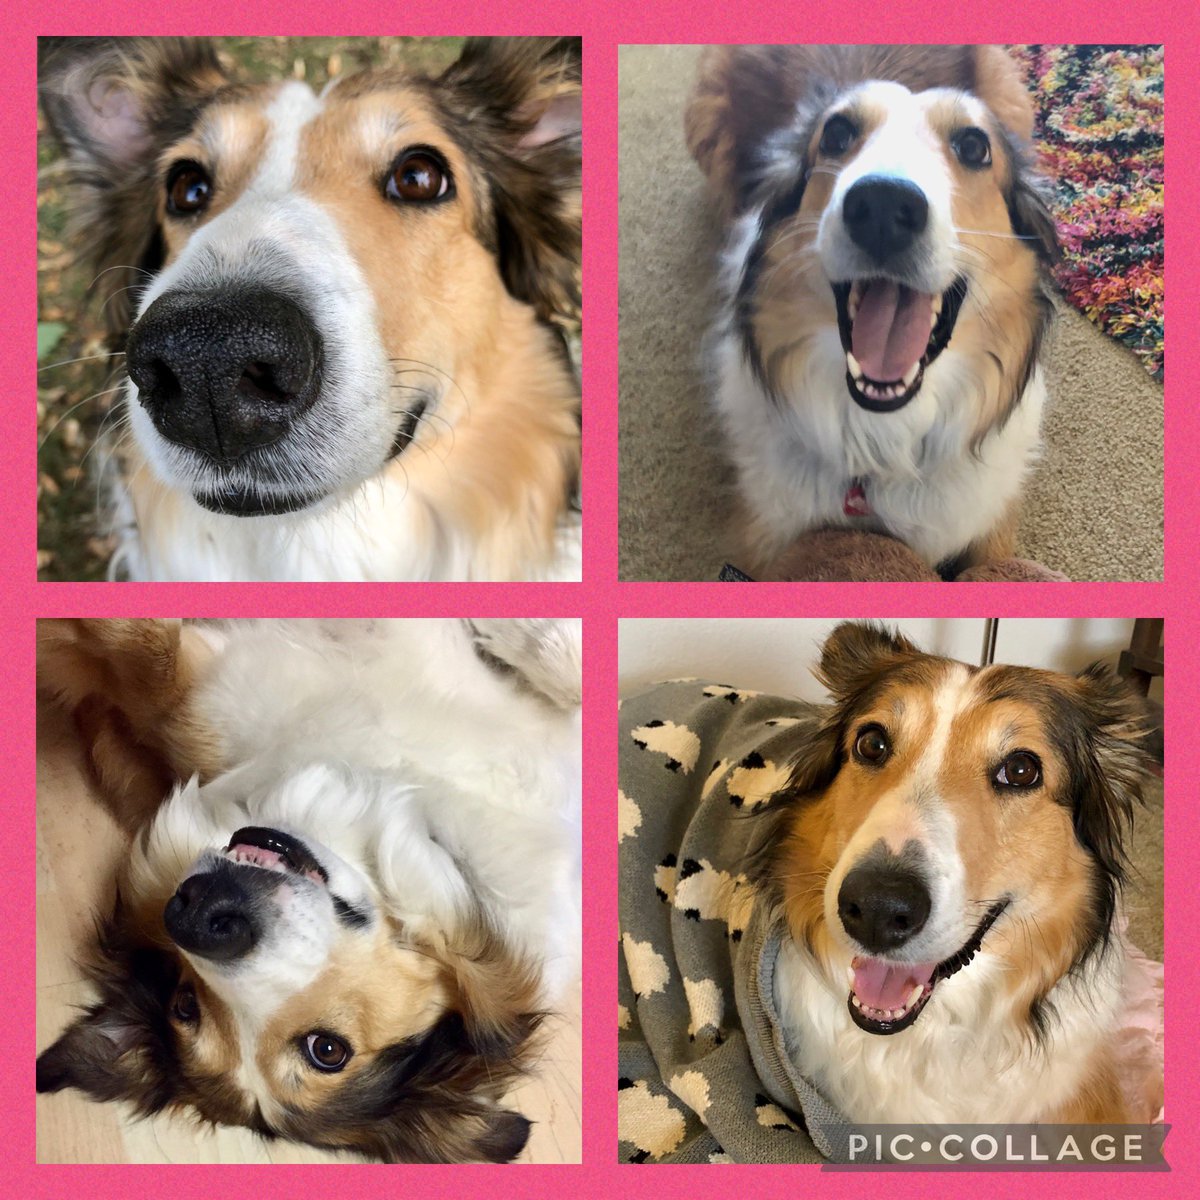 #PhotoChallenge2021May (smile)
These are some of my best smiles! 

#dogsoftwitter #collie #smile